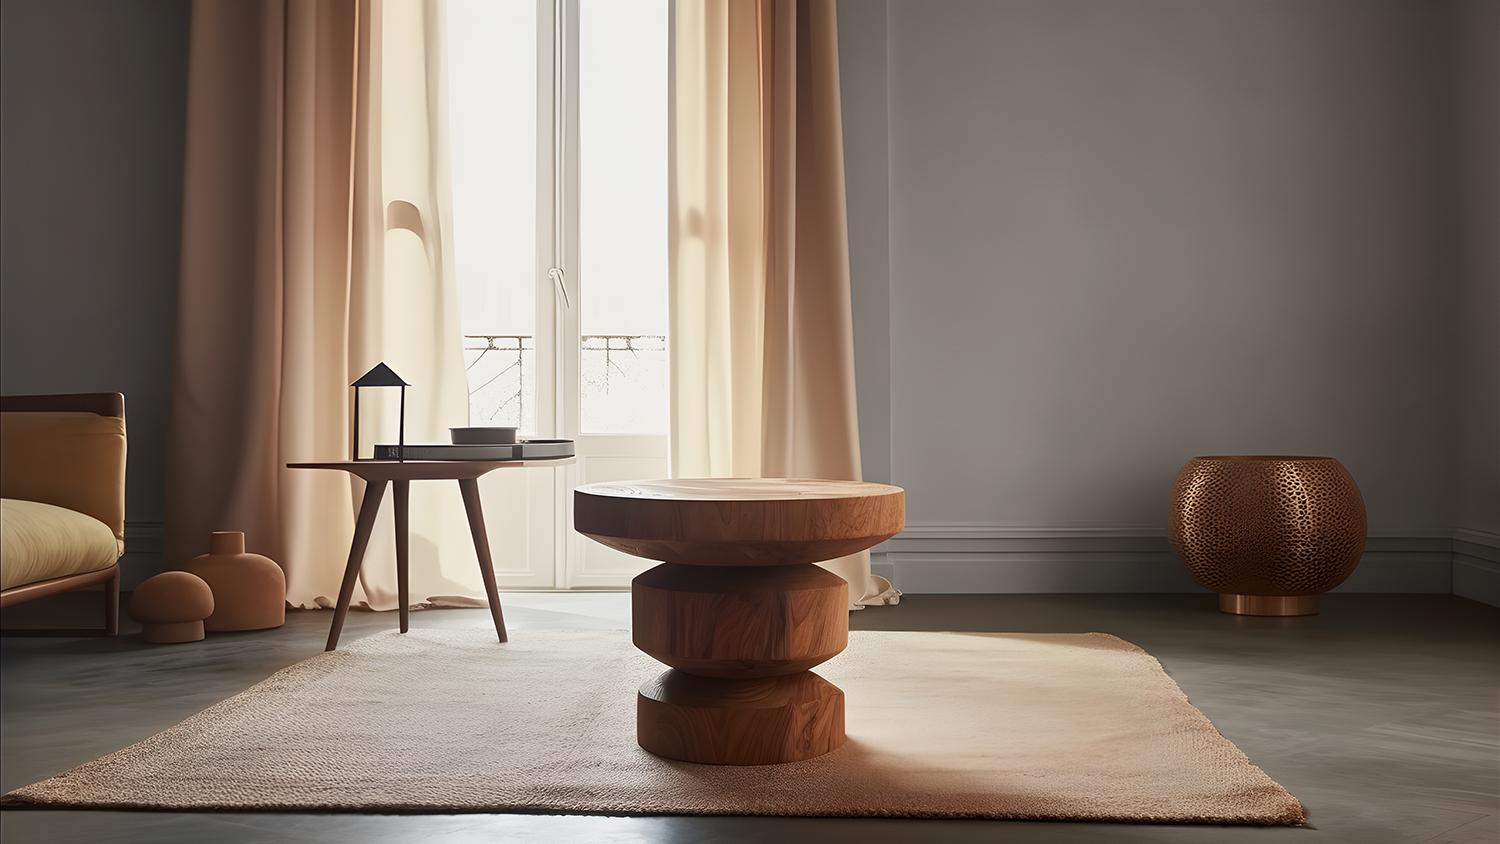 Socle side table, auxiliary table, night stand

Socle is a small solid wood table designed by the NONO design team. Made of solid wood, its elaborated construction serves as a support, much like a plinth for a statue or sculpture.

In the past,